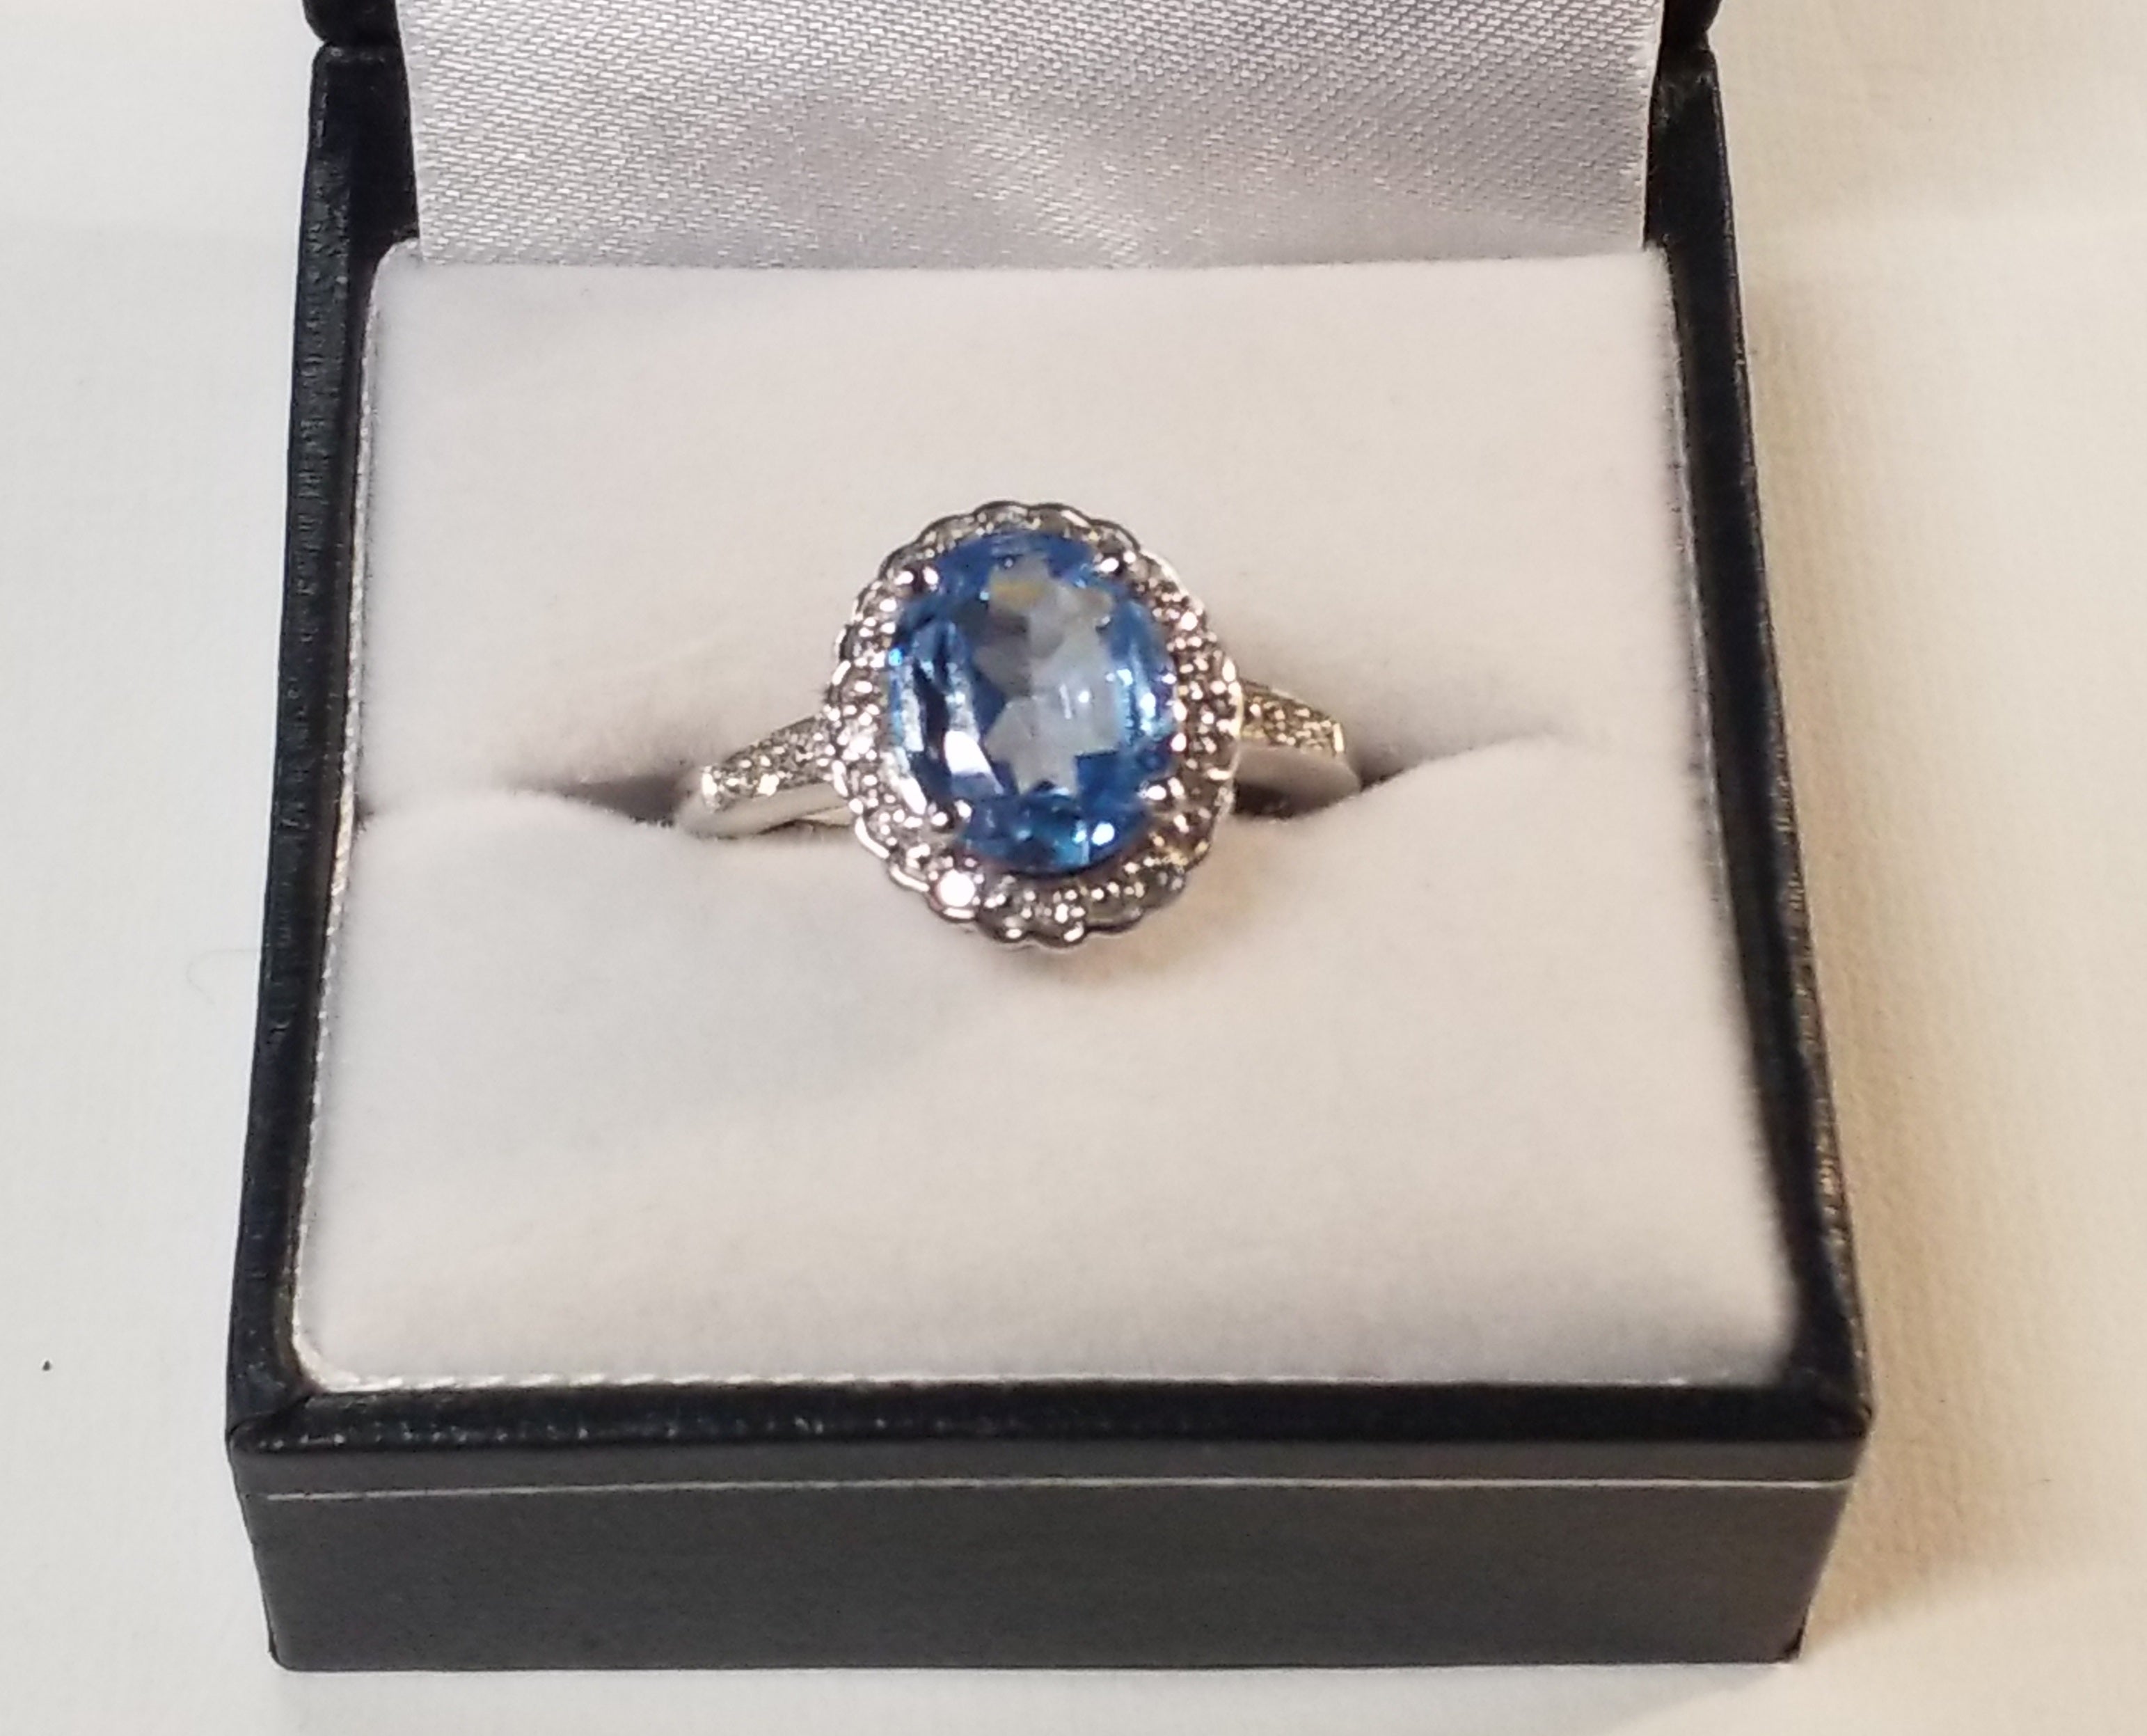 Oval Cut Blue Topaz Ring with Diamond Accents